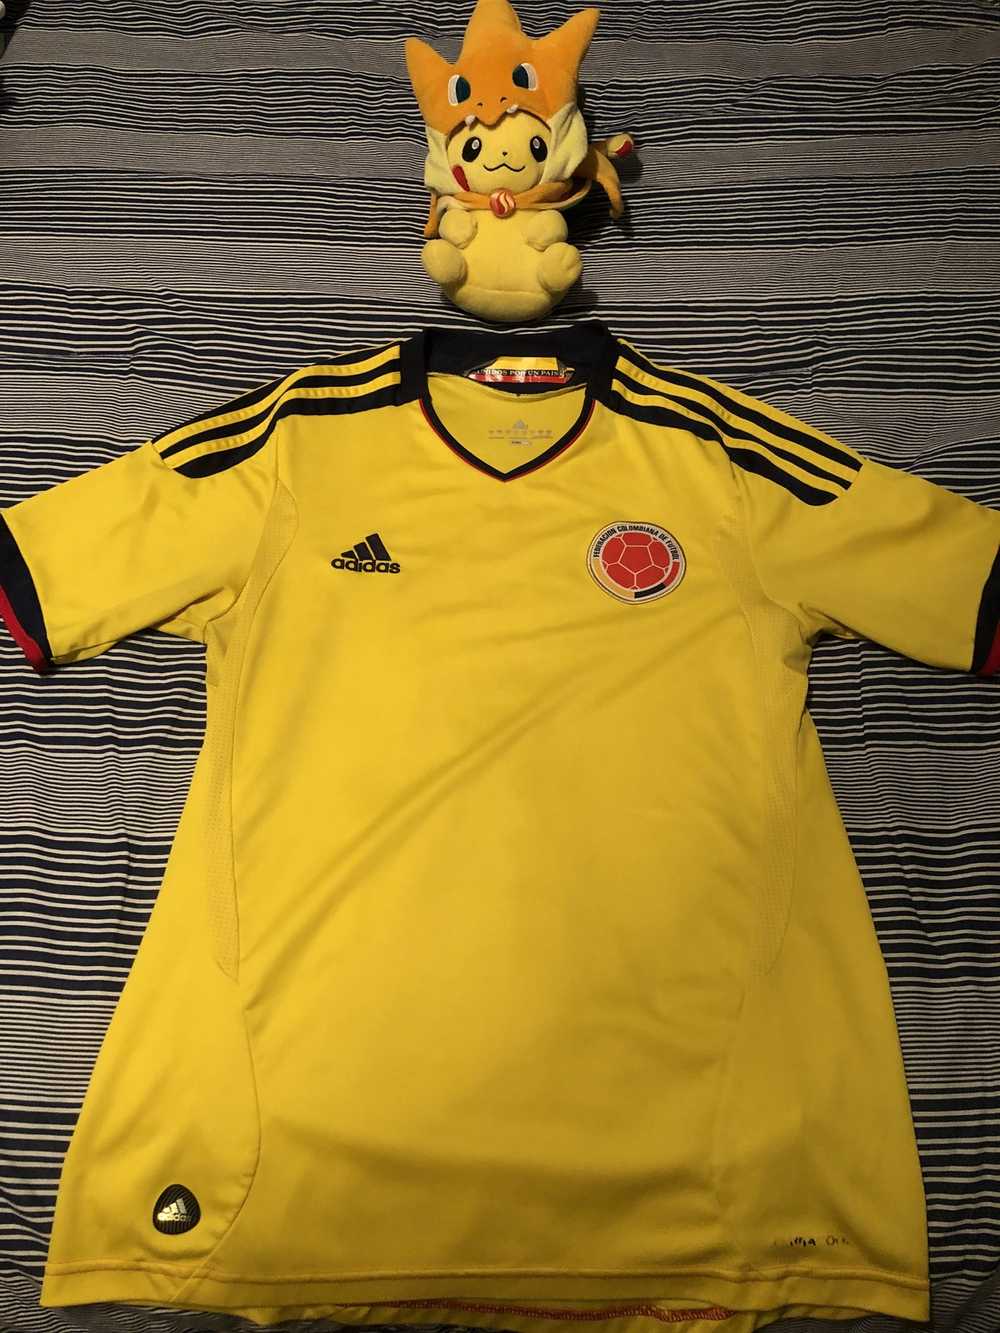 Adidas Colombia 2013 Jersey - image 4